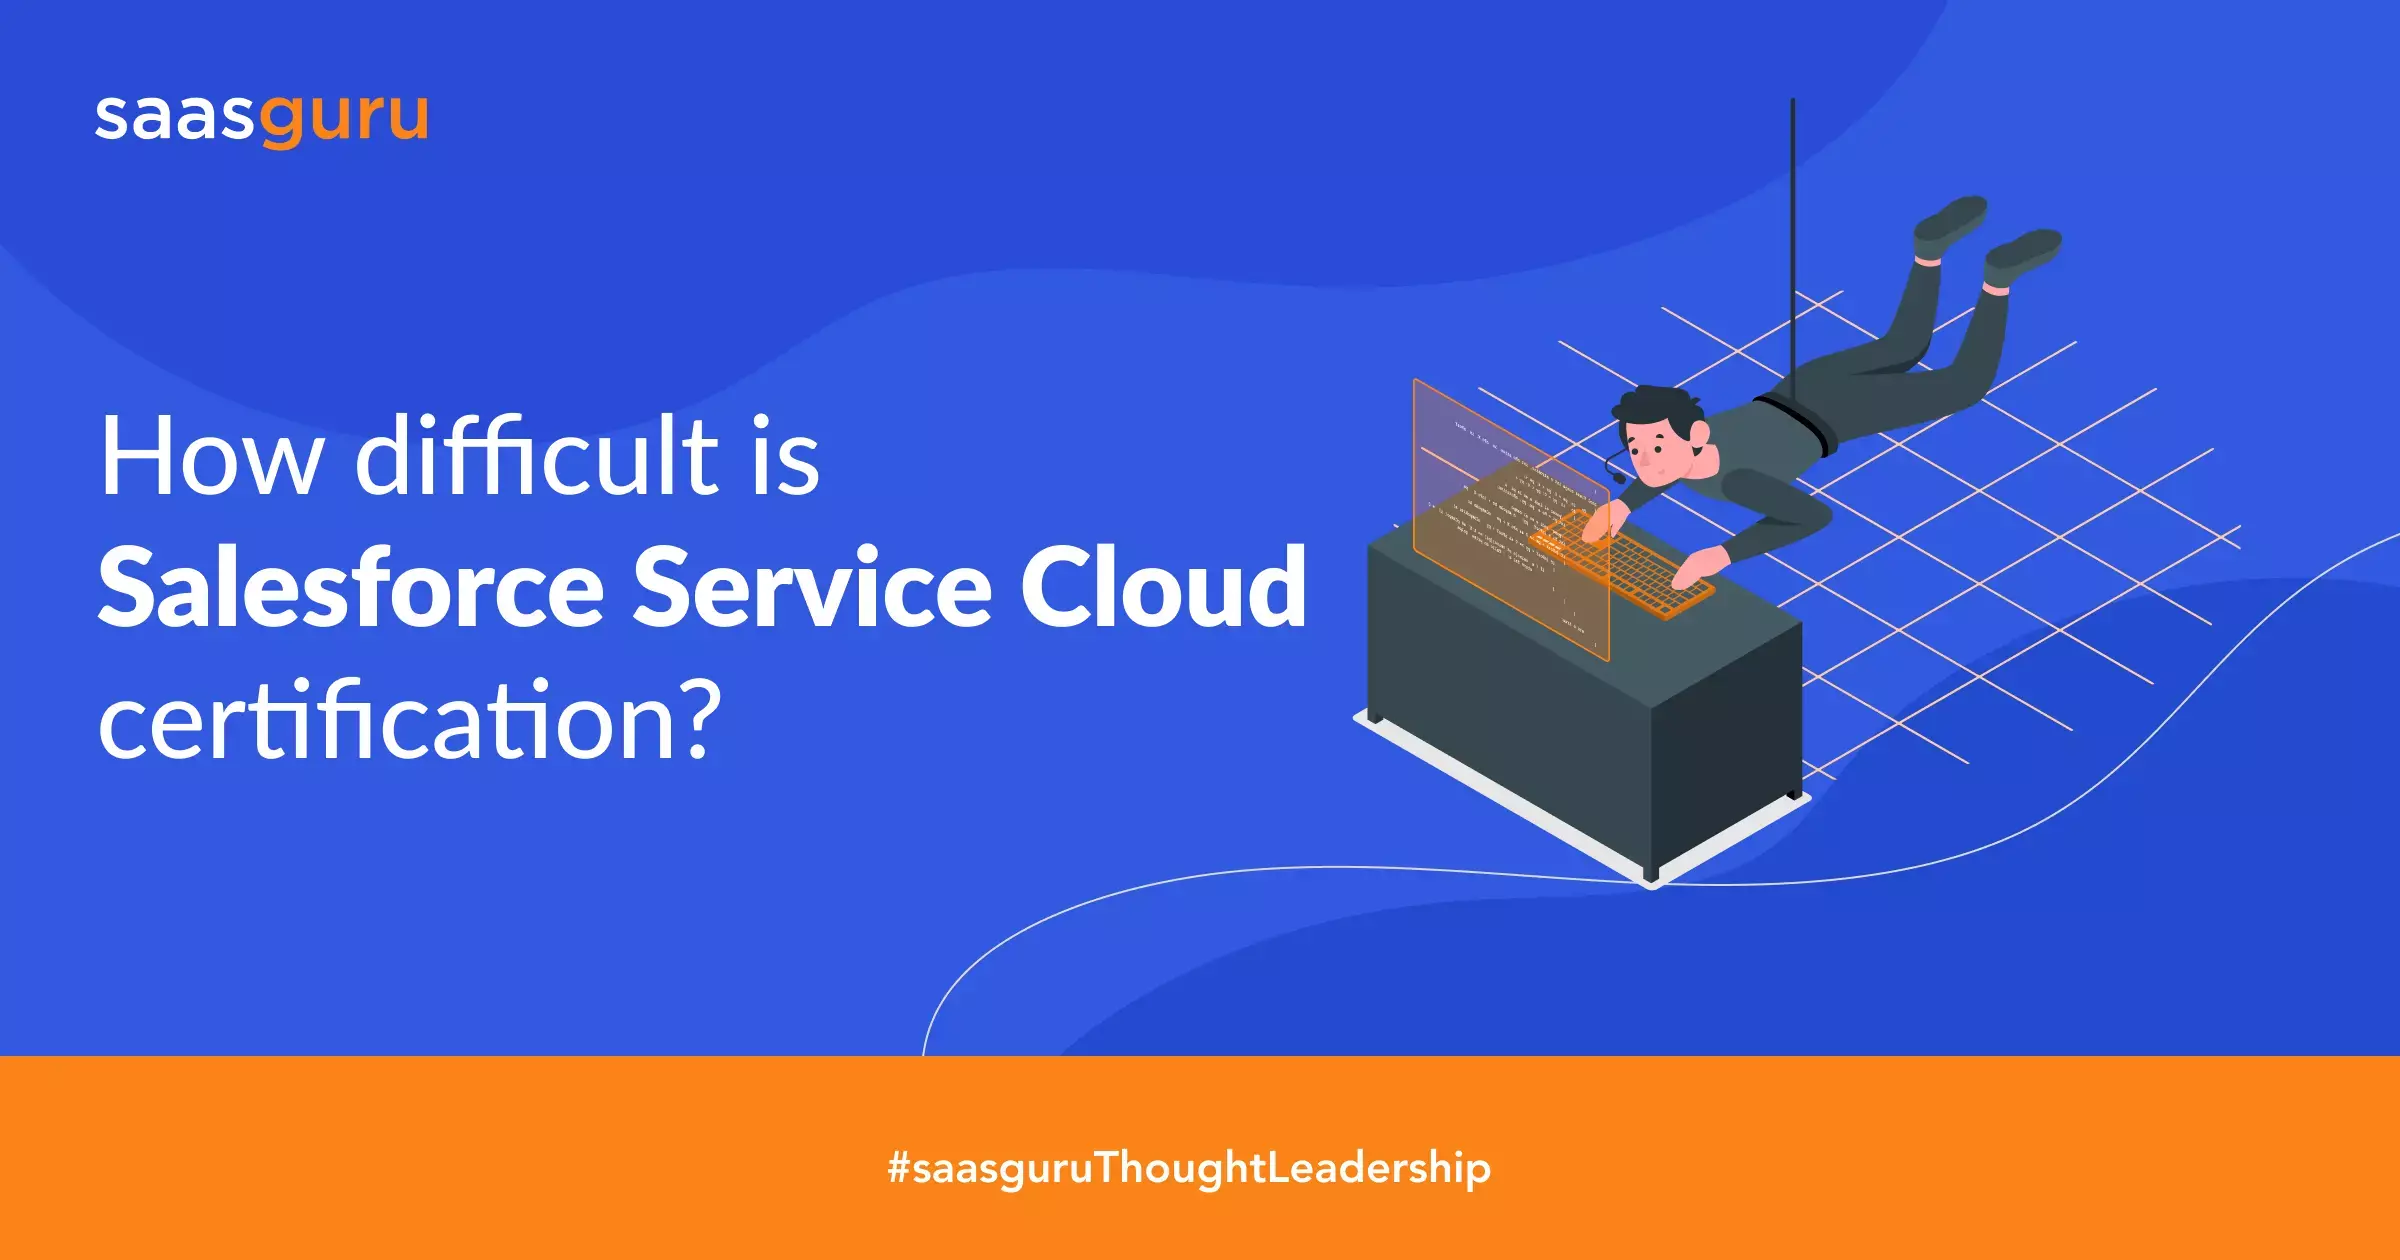 How difficult is Salesforce Service Cloud Certification?